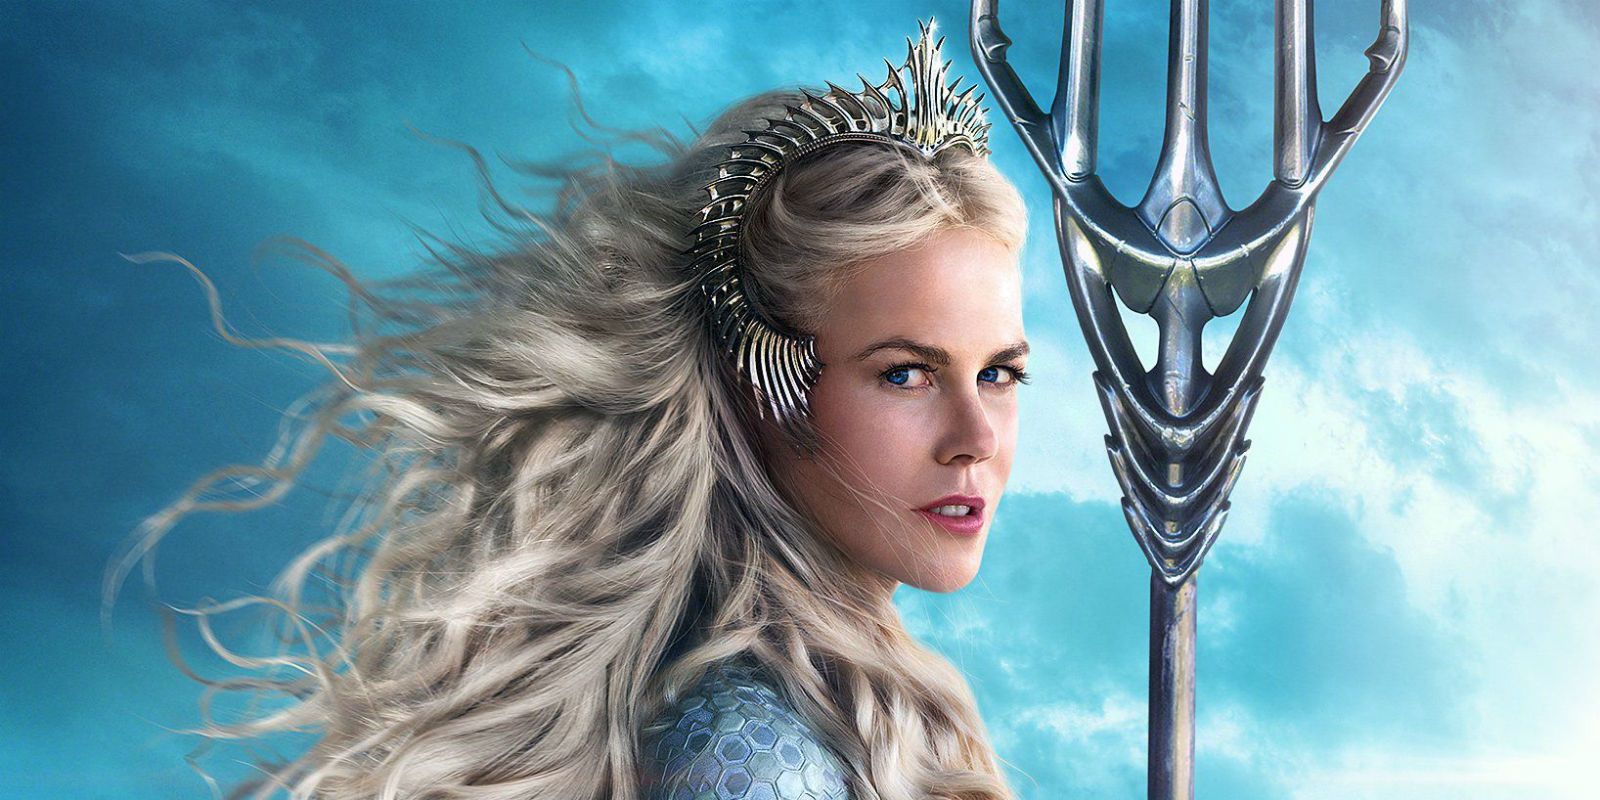 Nicole Kidman as Atlanna, holding a trident in a poster for Aquaman